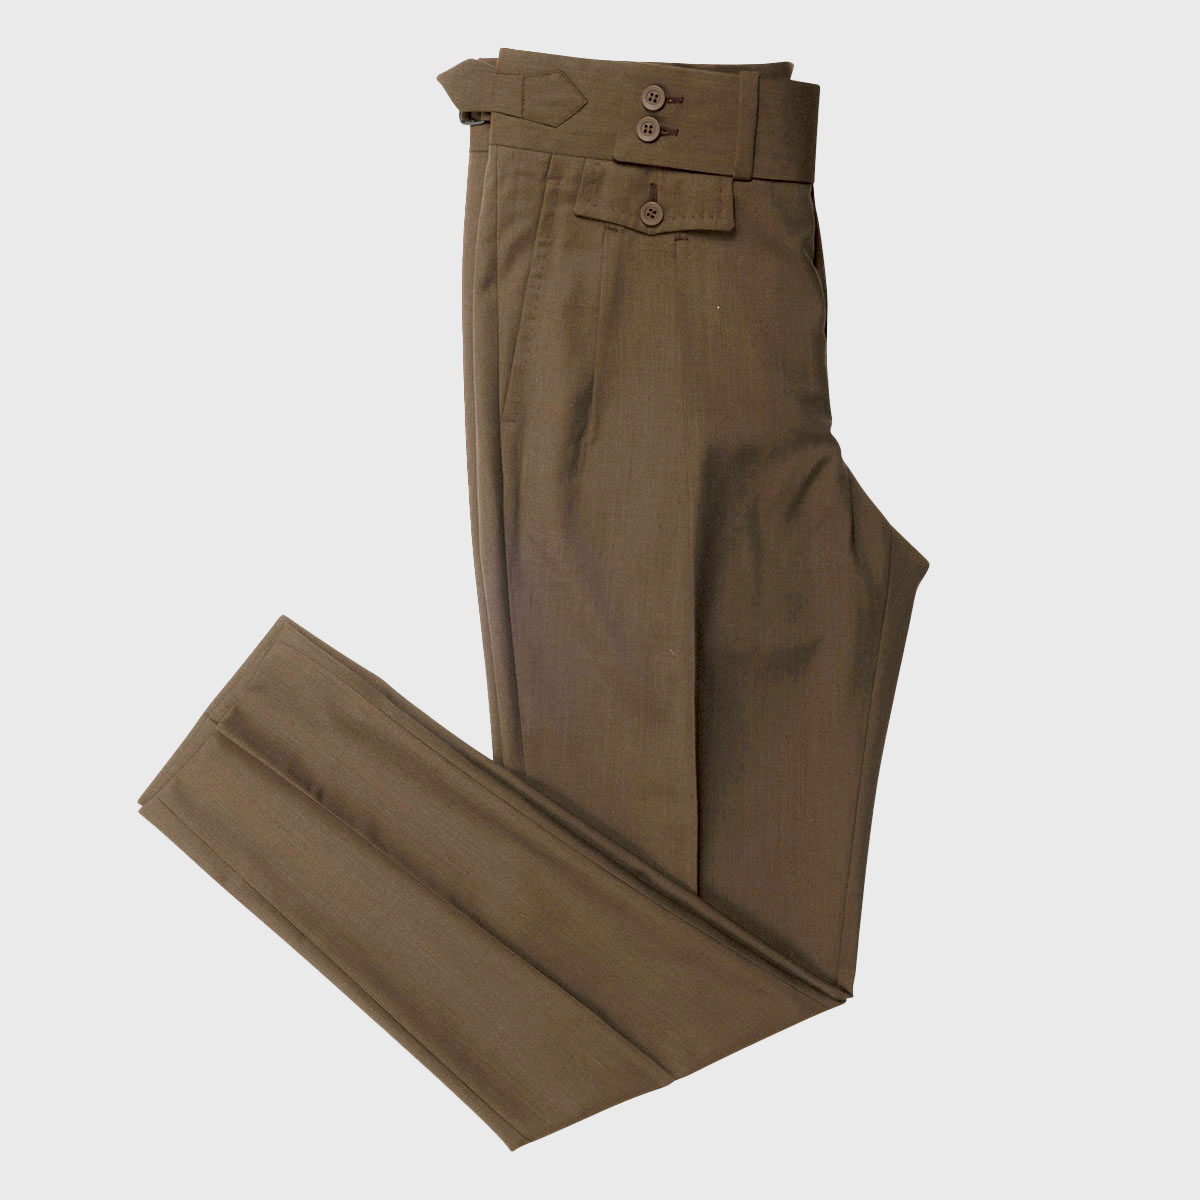 2 Pleats Super 100’s Wool Trousers in Brown Sartoria Lavore on sale 2022